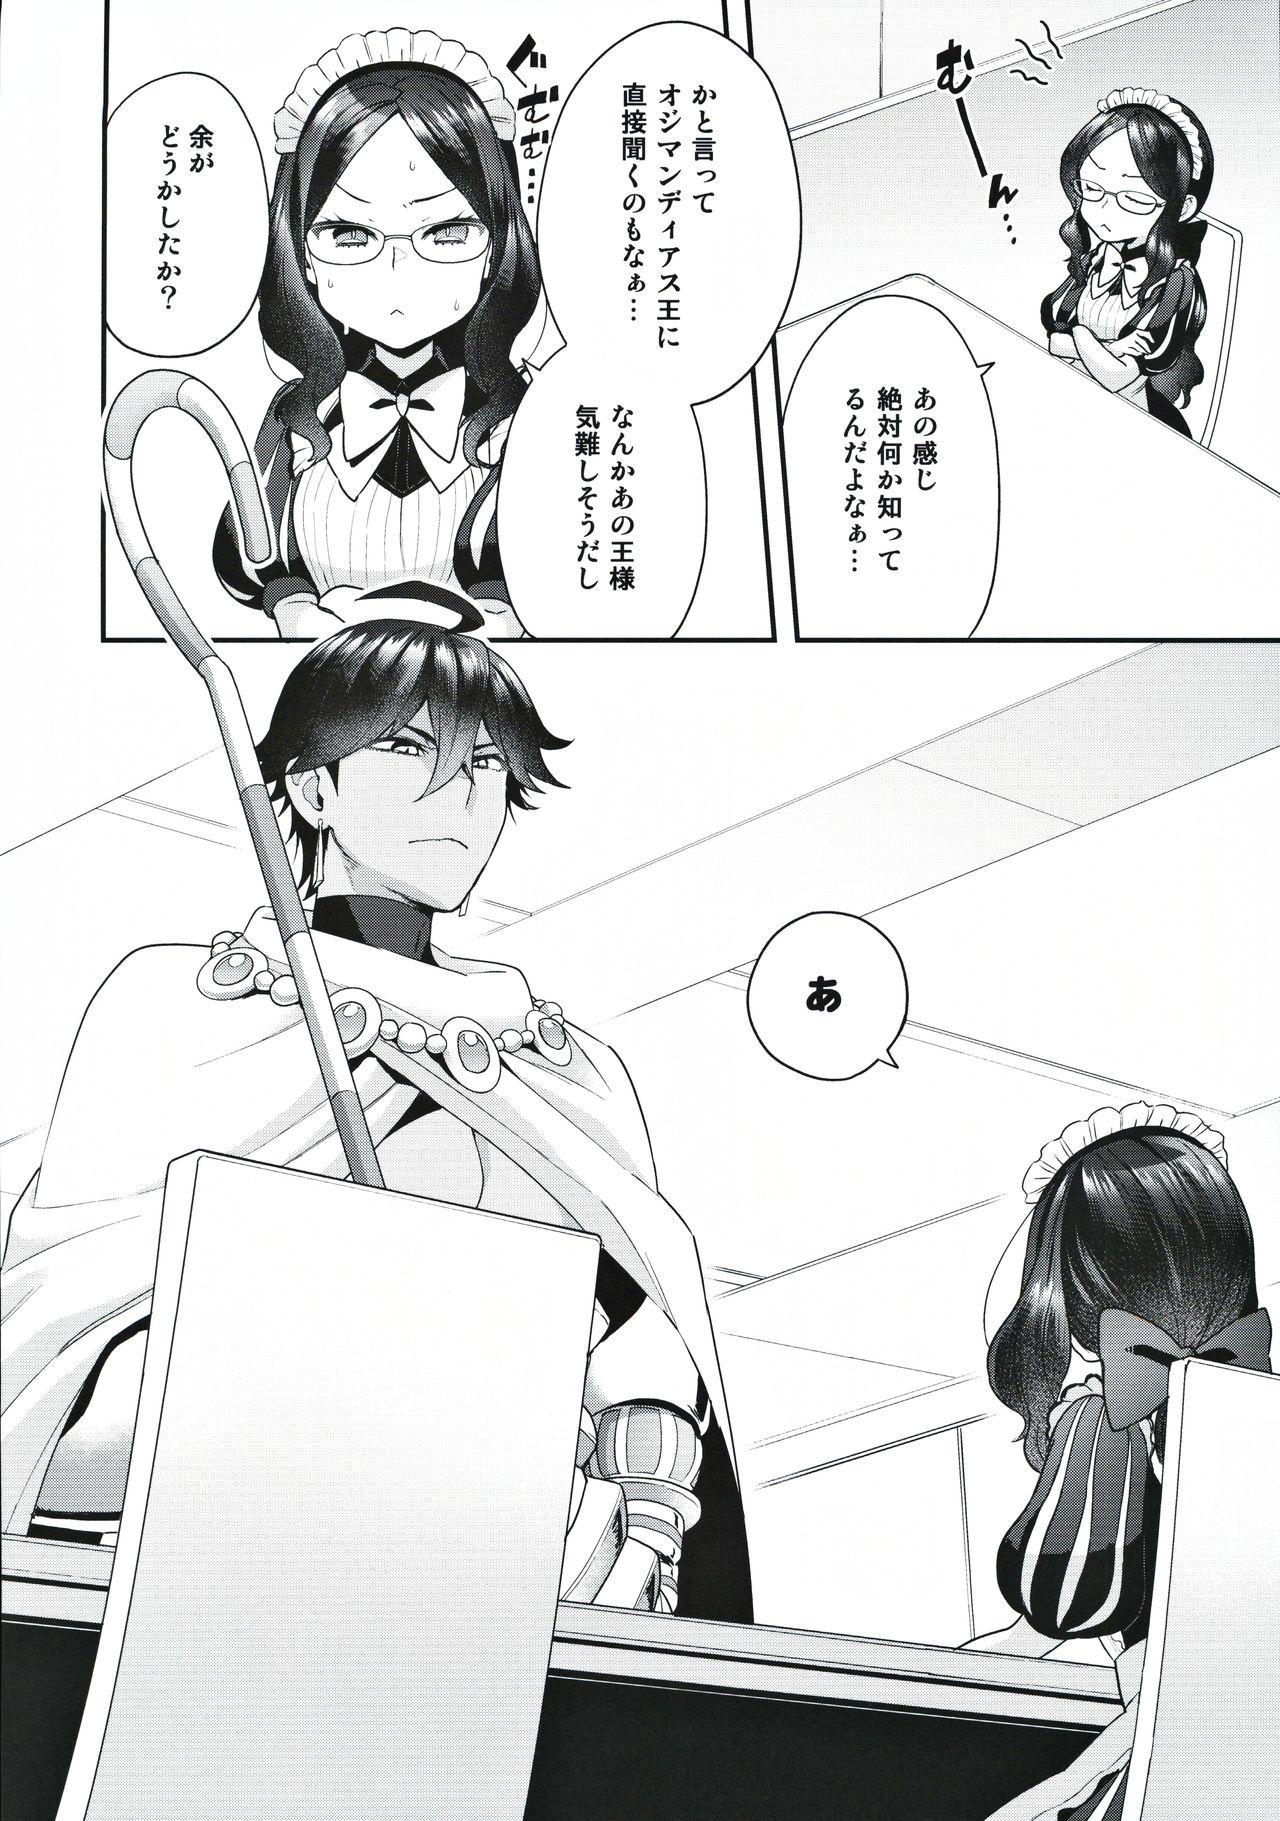 Interracial Taiyouou to no Kankei - Fate grand order Stretch - Page 5